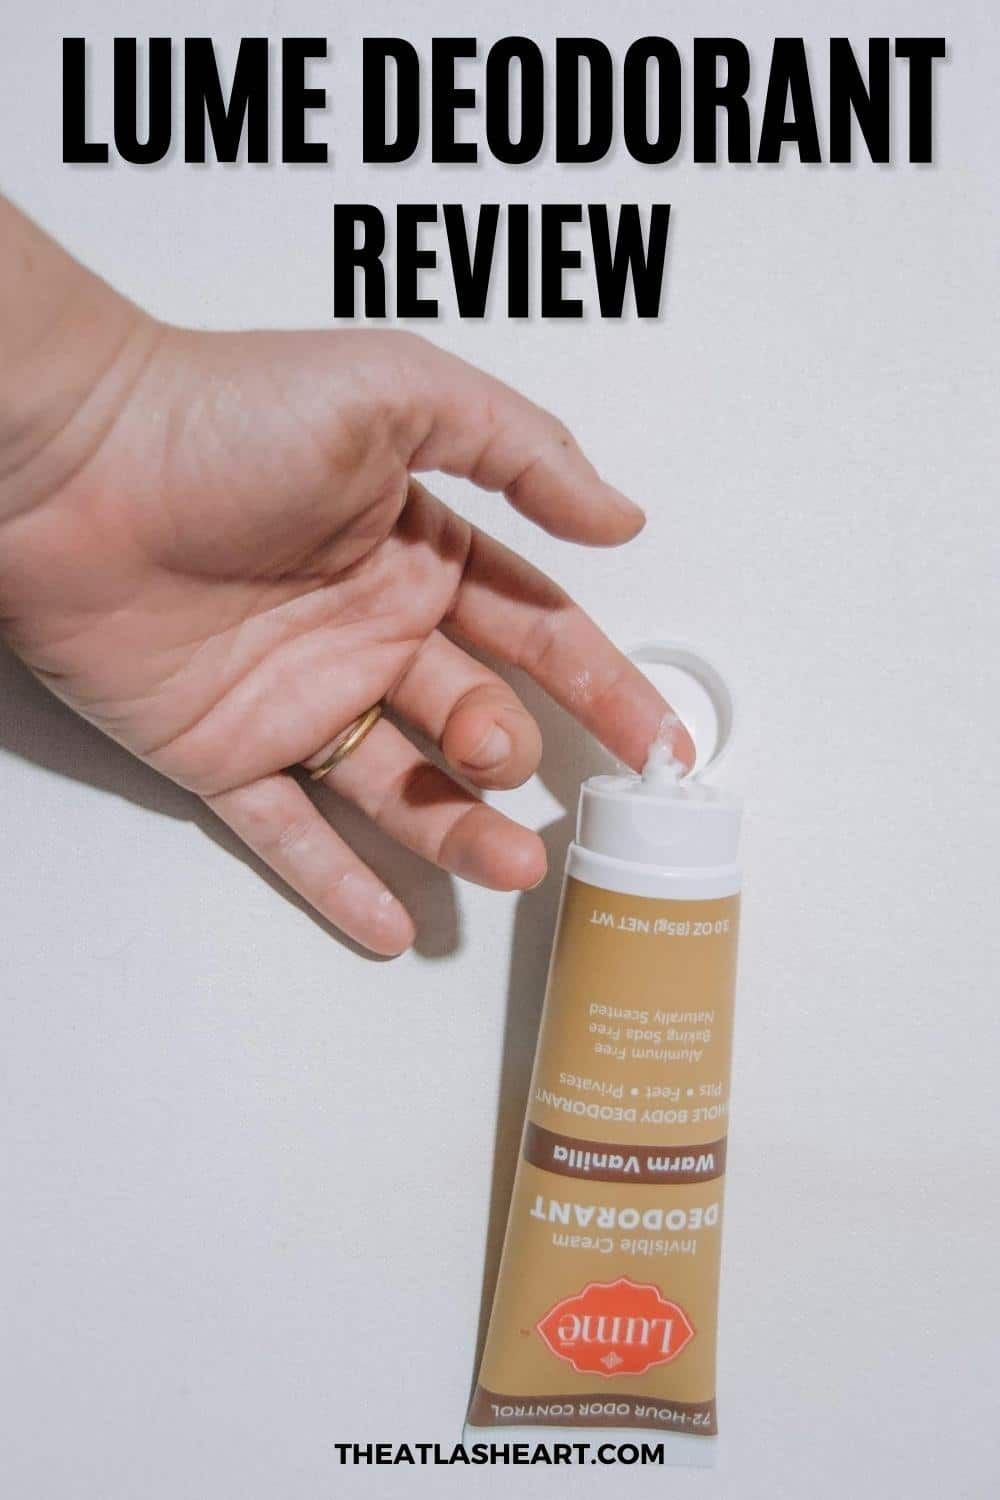 A hand takes a dollop of a Lume cream deodorant from a brown tube against a white background, with the text overlay, "Lume Deodorant Review."